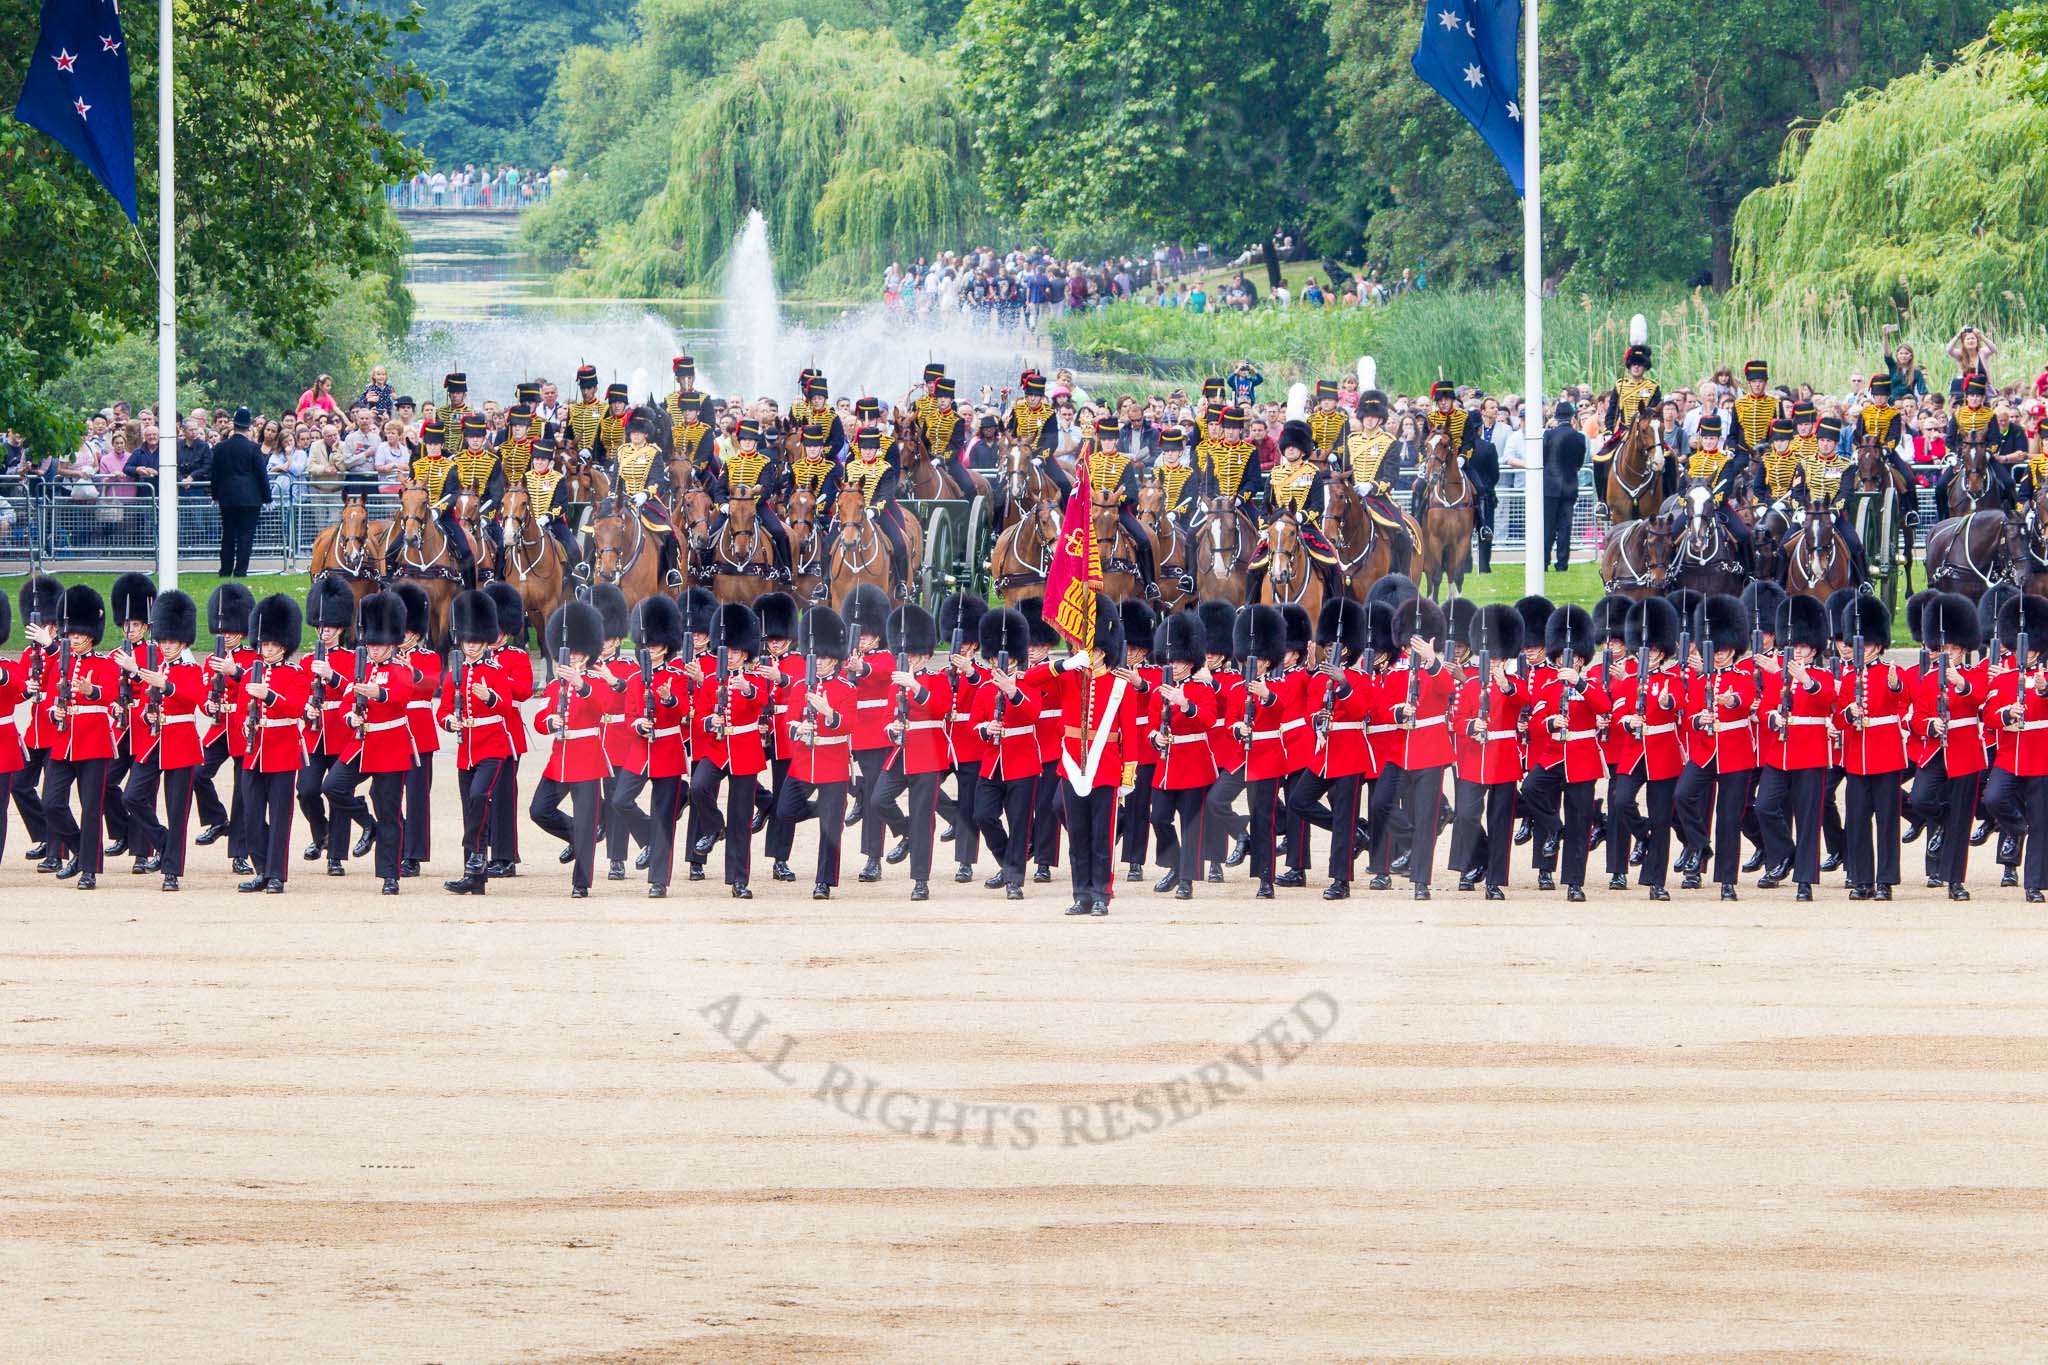 Trooping the Colour 2014.
Horse Guards Parade, Westminster,
London SW1A,

United Kingdom,
on 14 June 2014 at 11:29, image #578